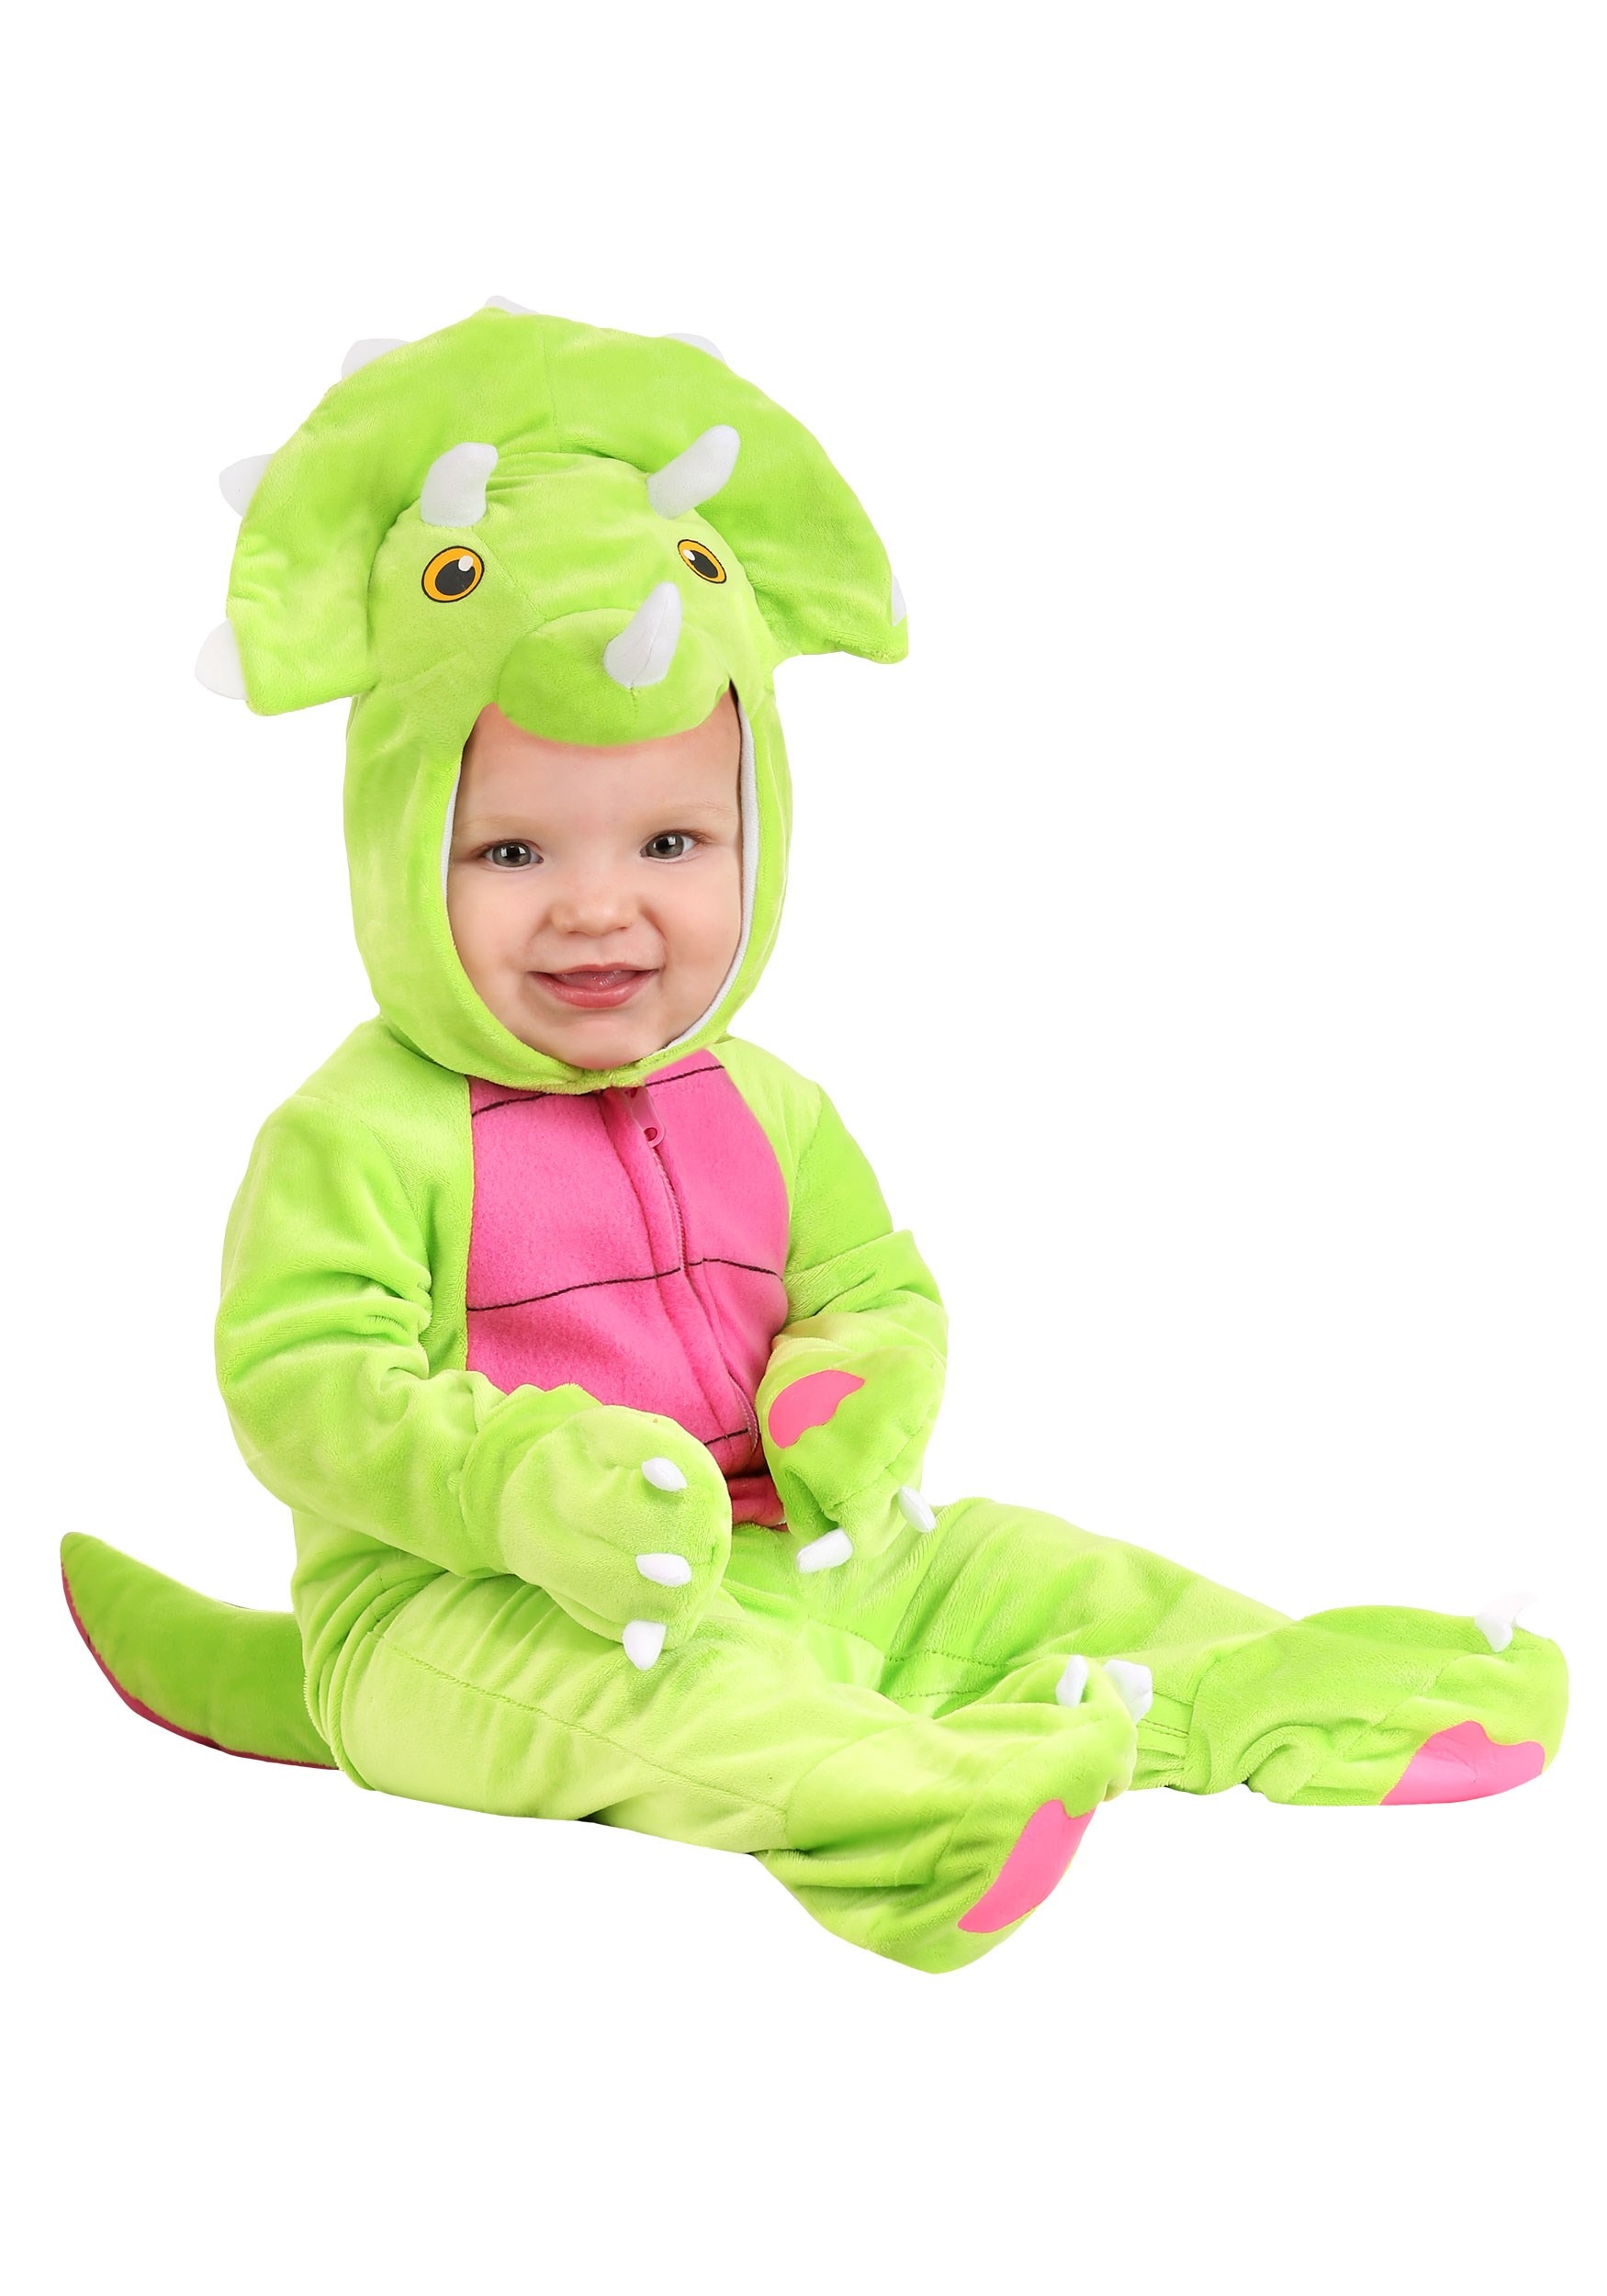 Photos - Fancy Dress FUN Costumes Tiny Triceratops Infant Costume Green/Pink/White FUN7